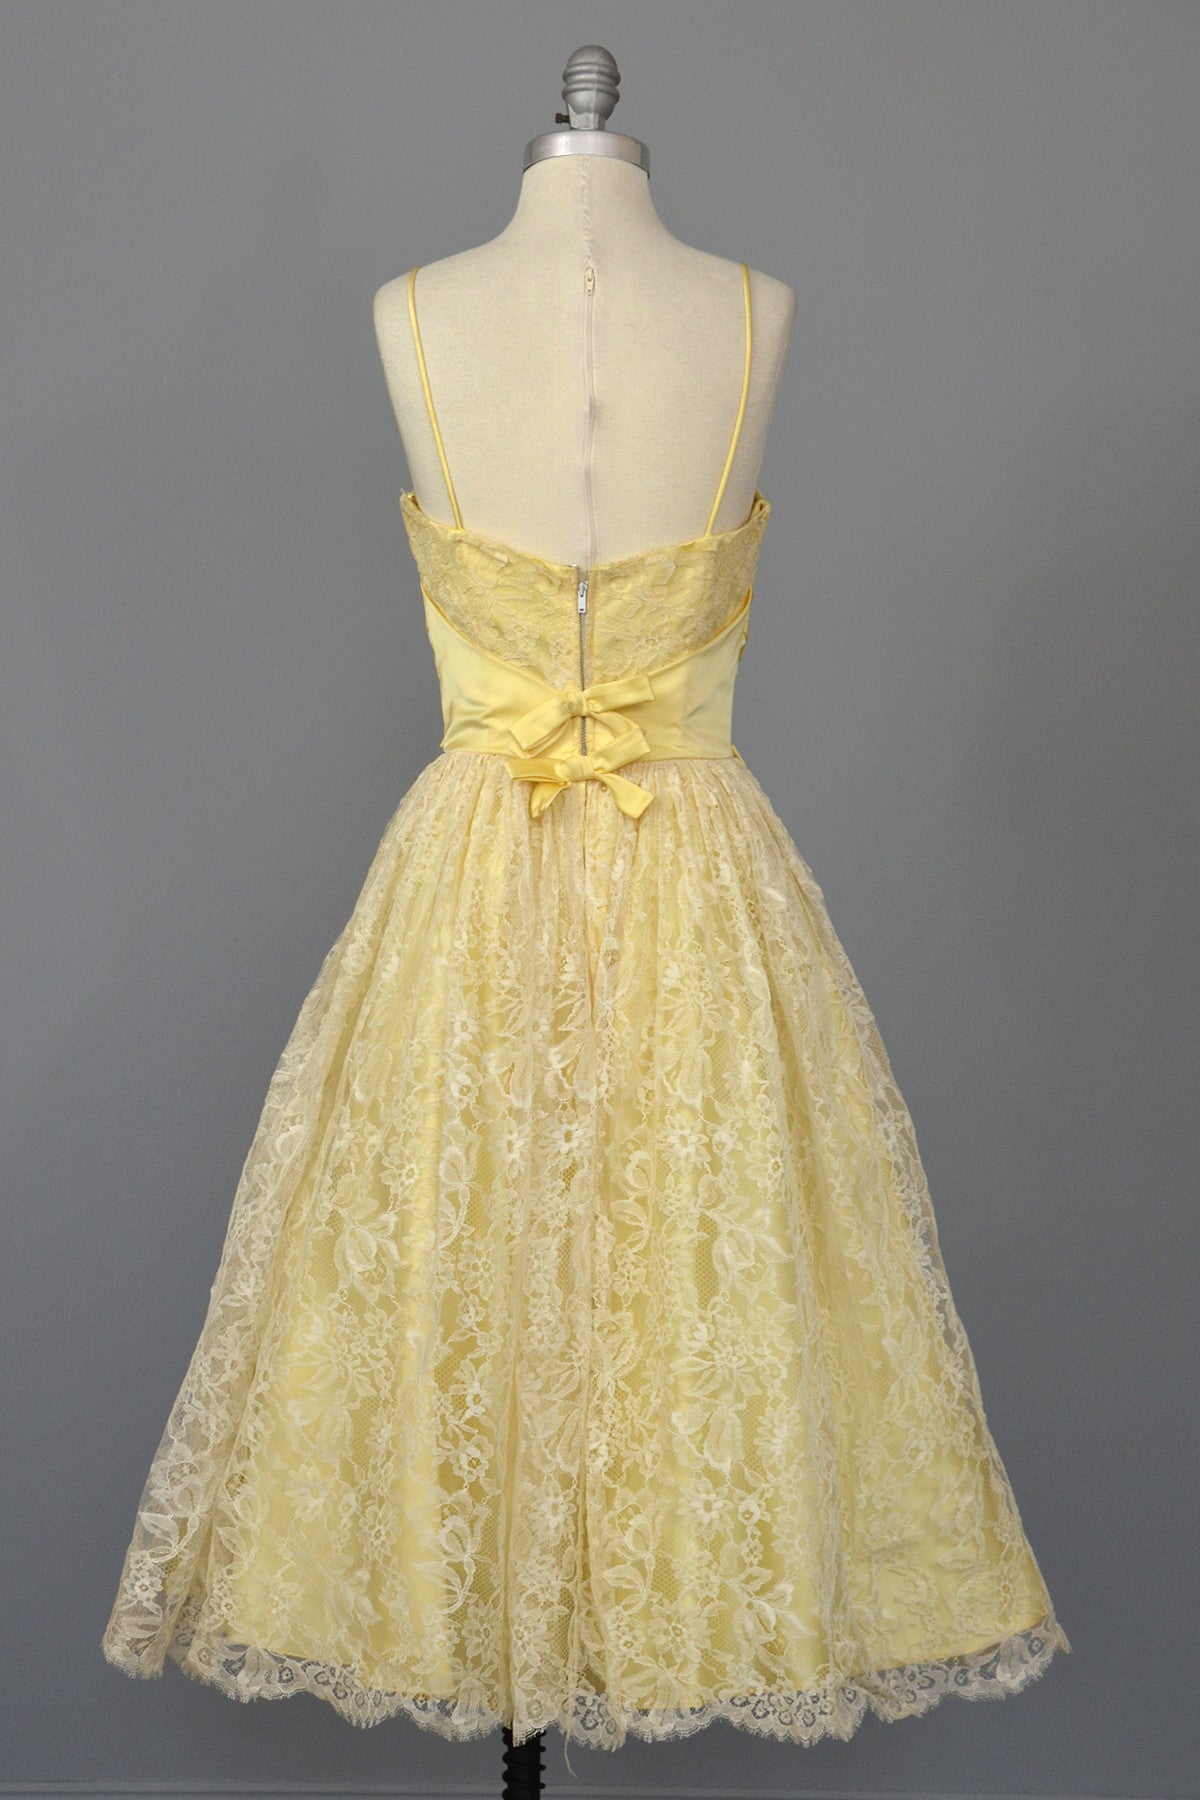 1950s White Lace Buttercup Party Prom Dress